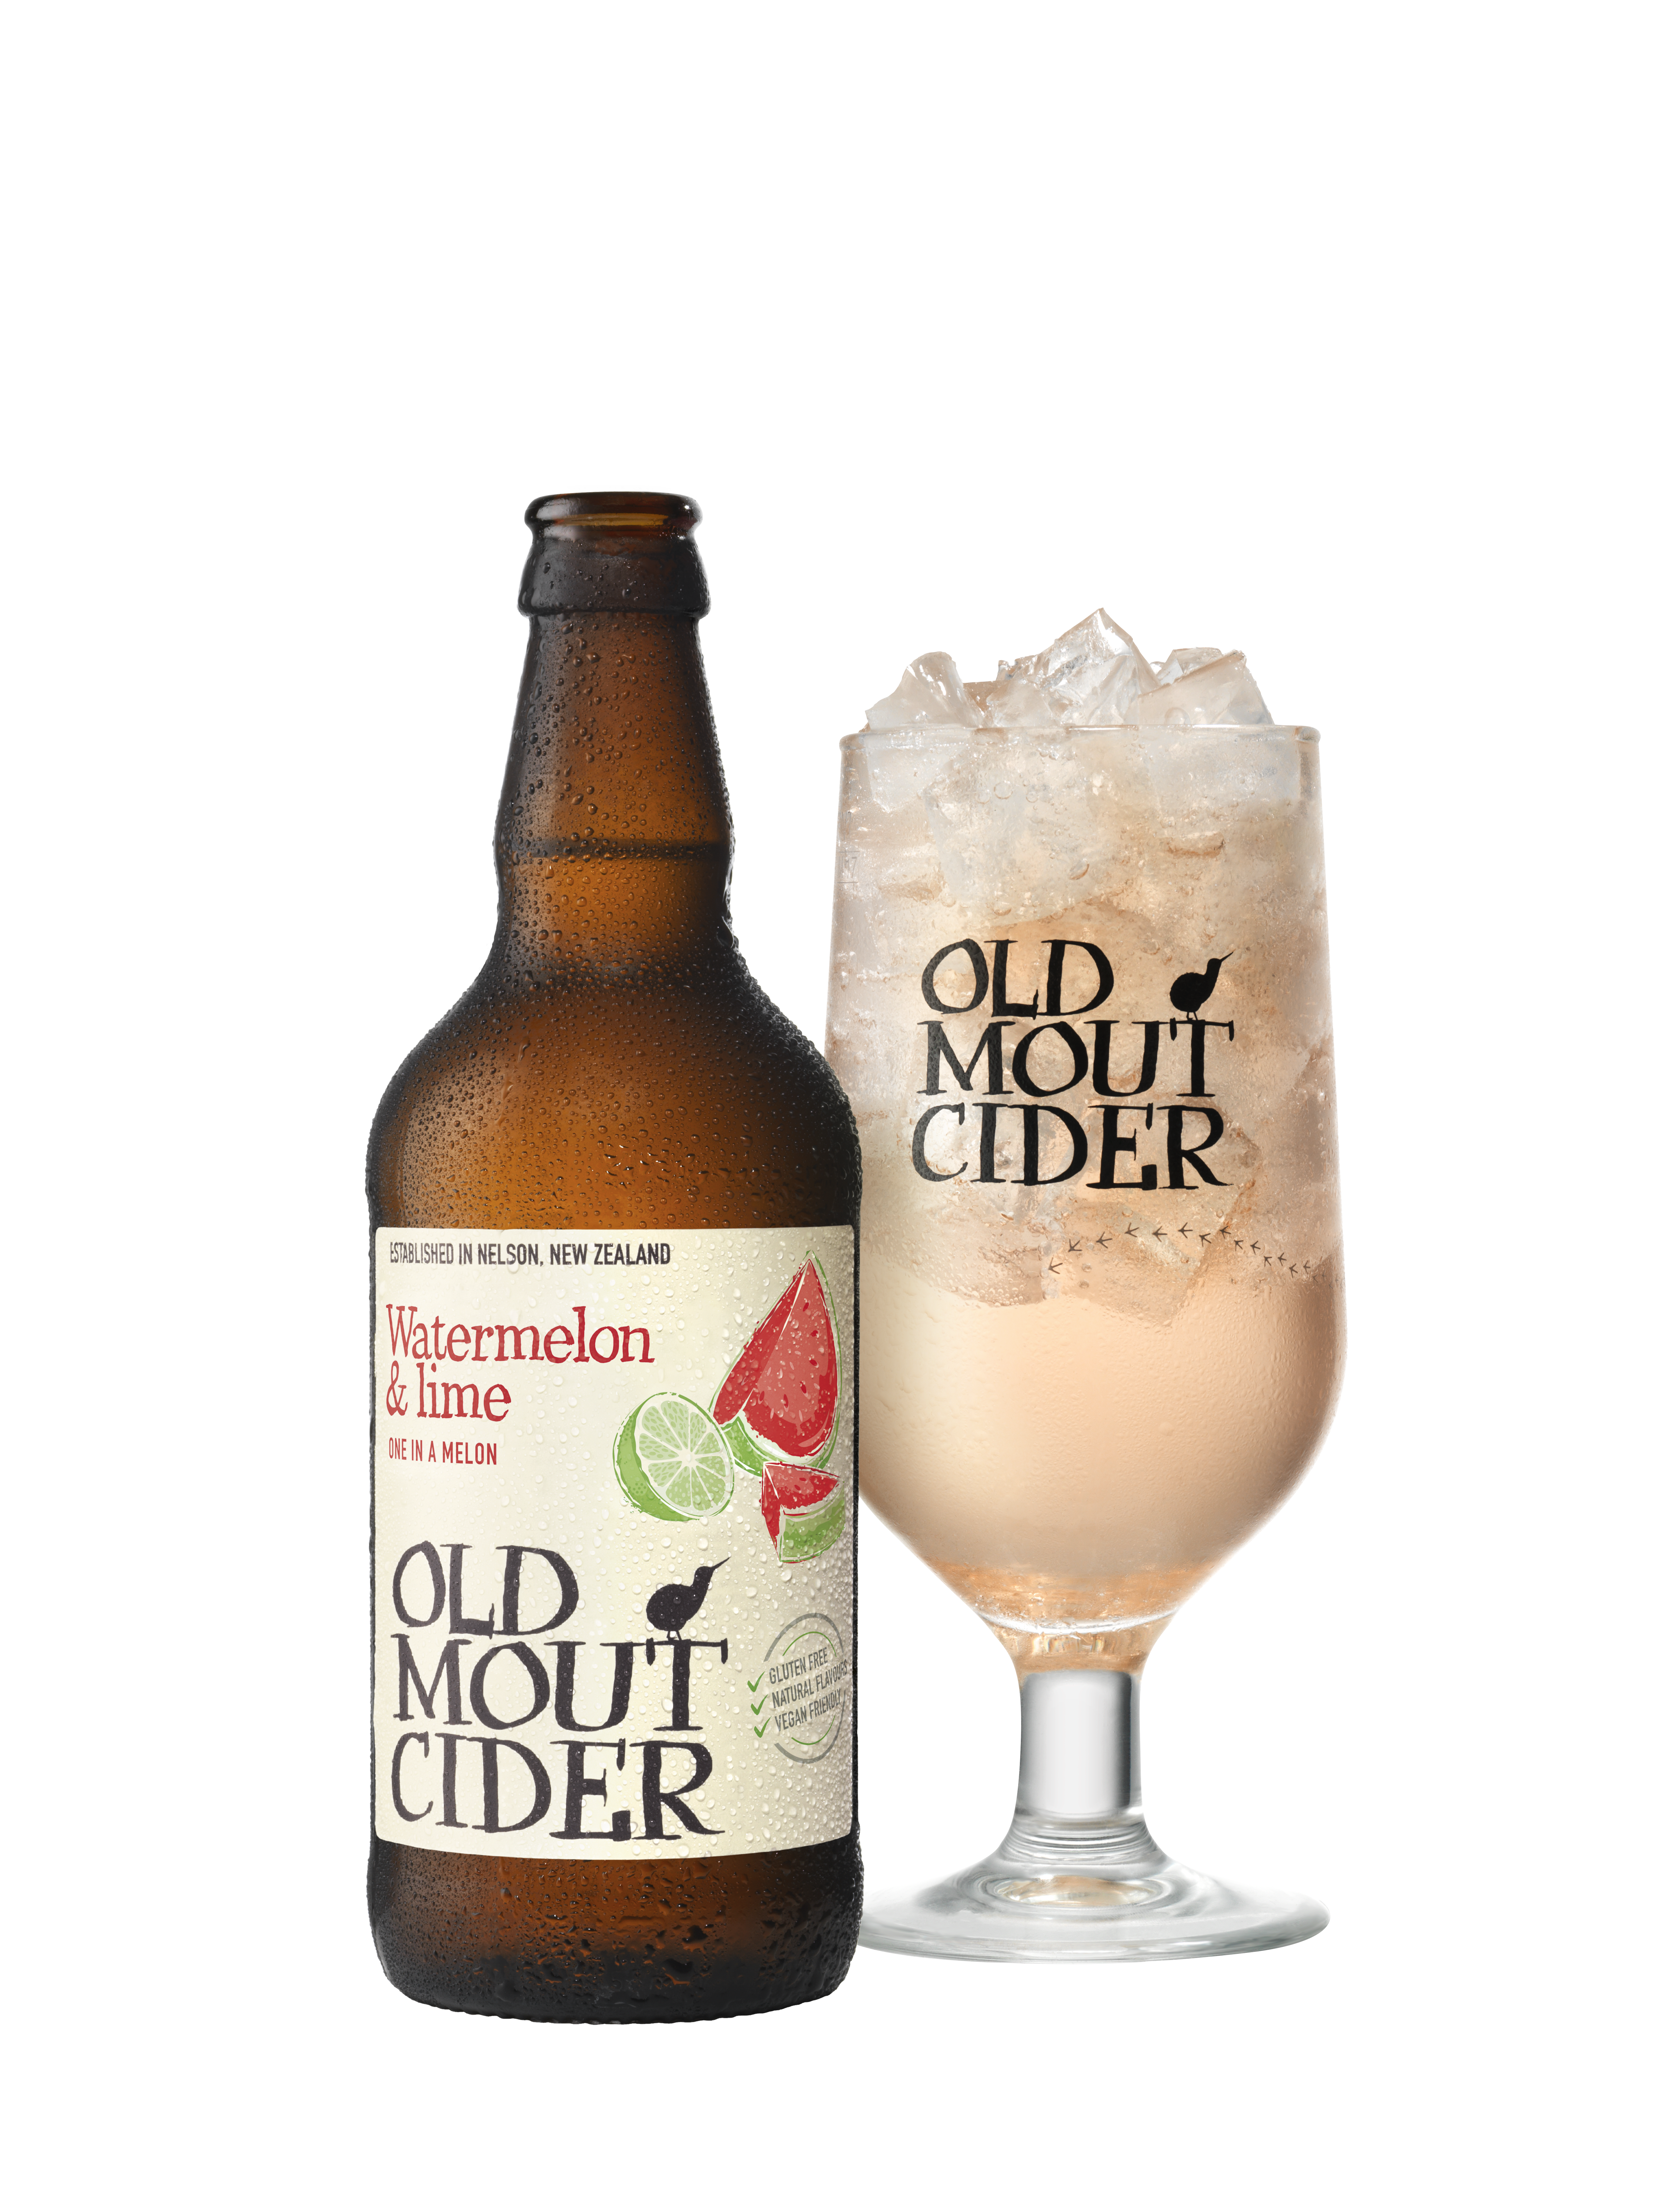 Old Mout launches watermelon & lime cider